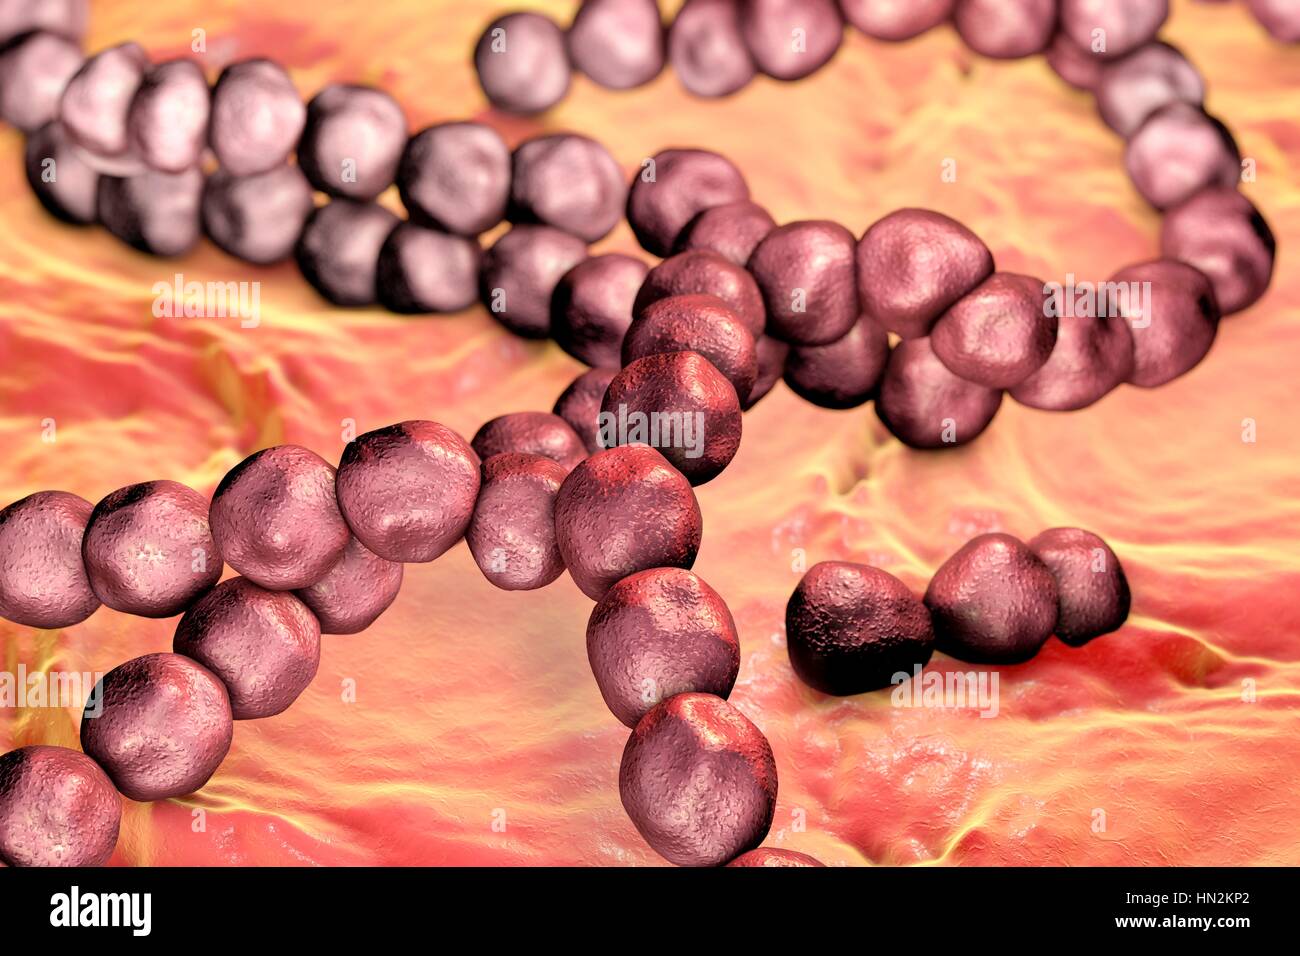 Streptococcus bacteria, computer illustration. Streptococcus bacteria are an example of cocci (round bacteria) that form chains. There are over 50 species of Streptococcus bacteria, some of which cause disease in humans. Stock Photo